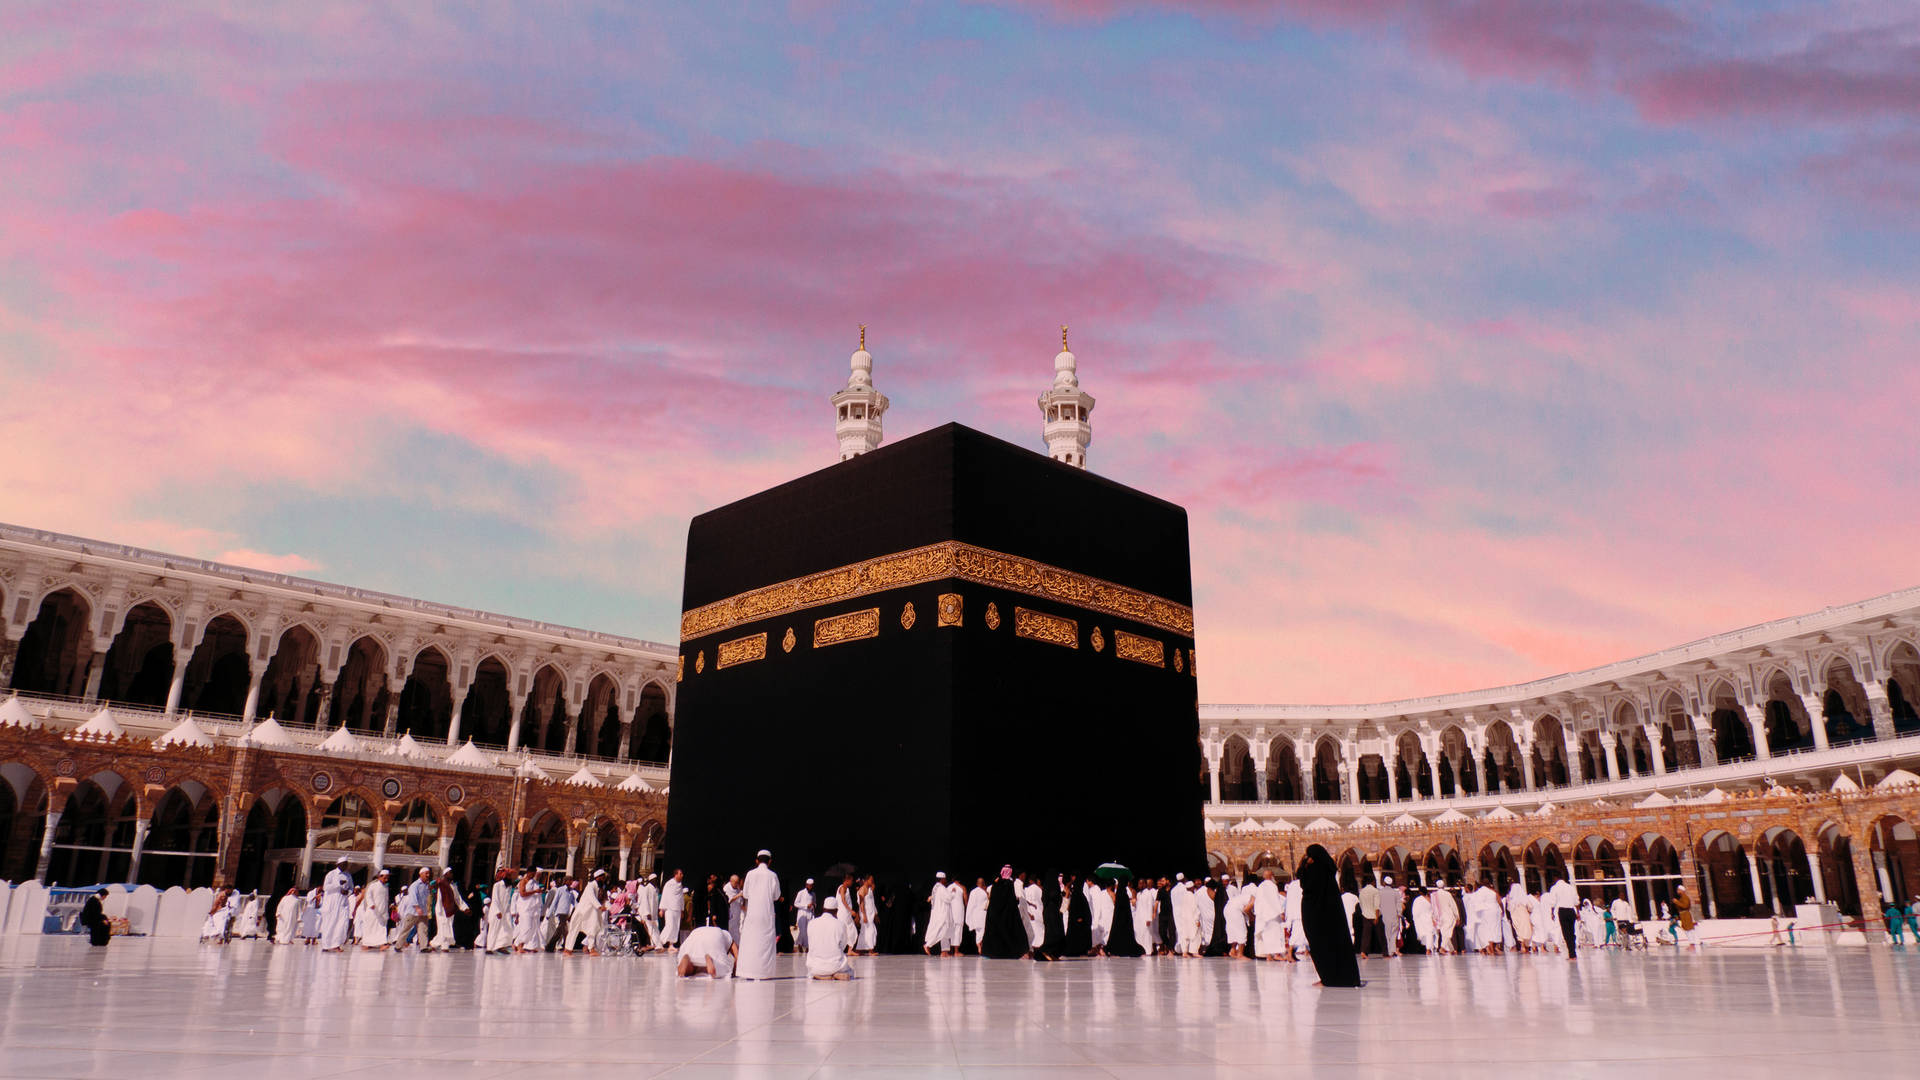 Kaaba Cloudy Pink Sky Picture